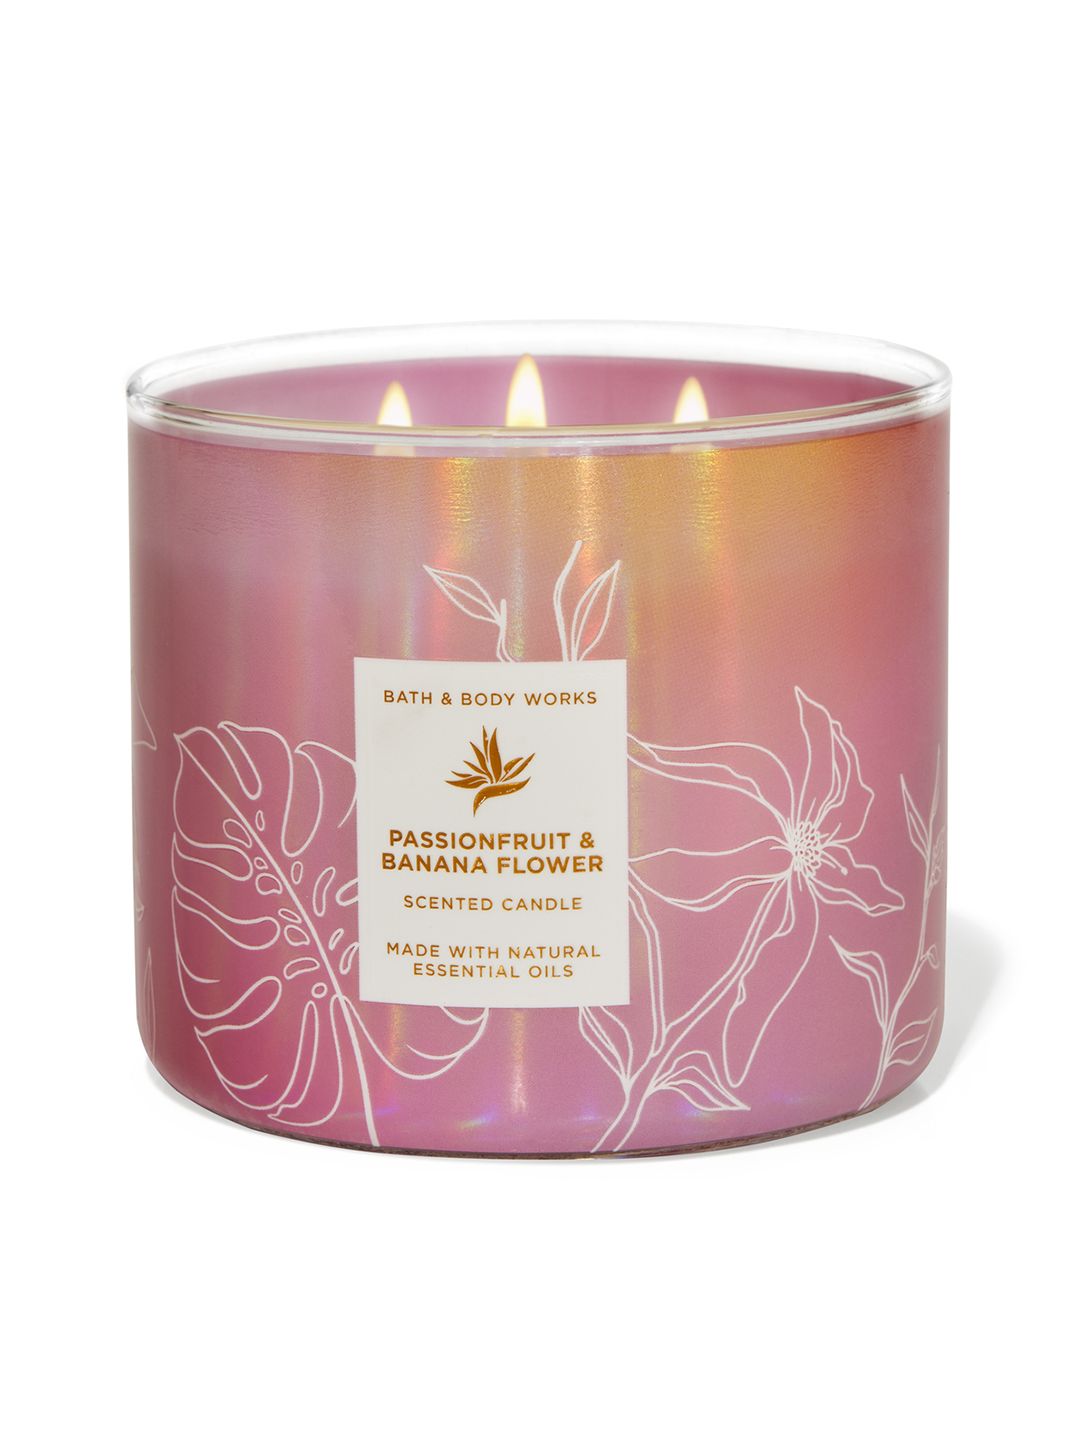 Bath & Body Works Passionfruit & Banana Flower Scented 3-Wick Candle - 411 g Price in India